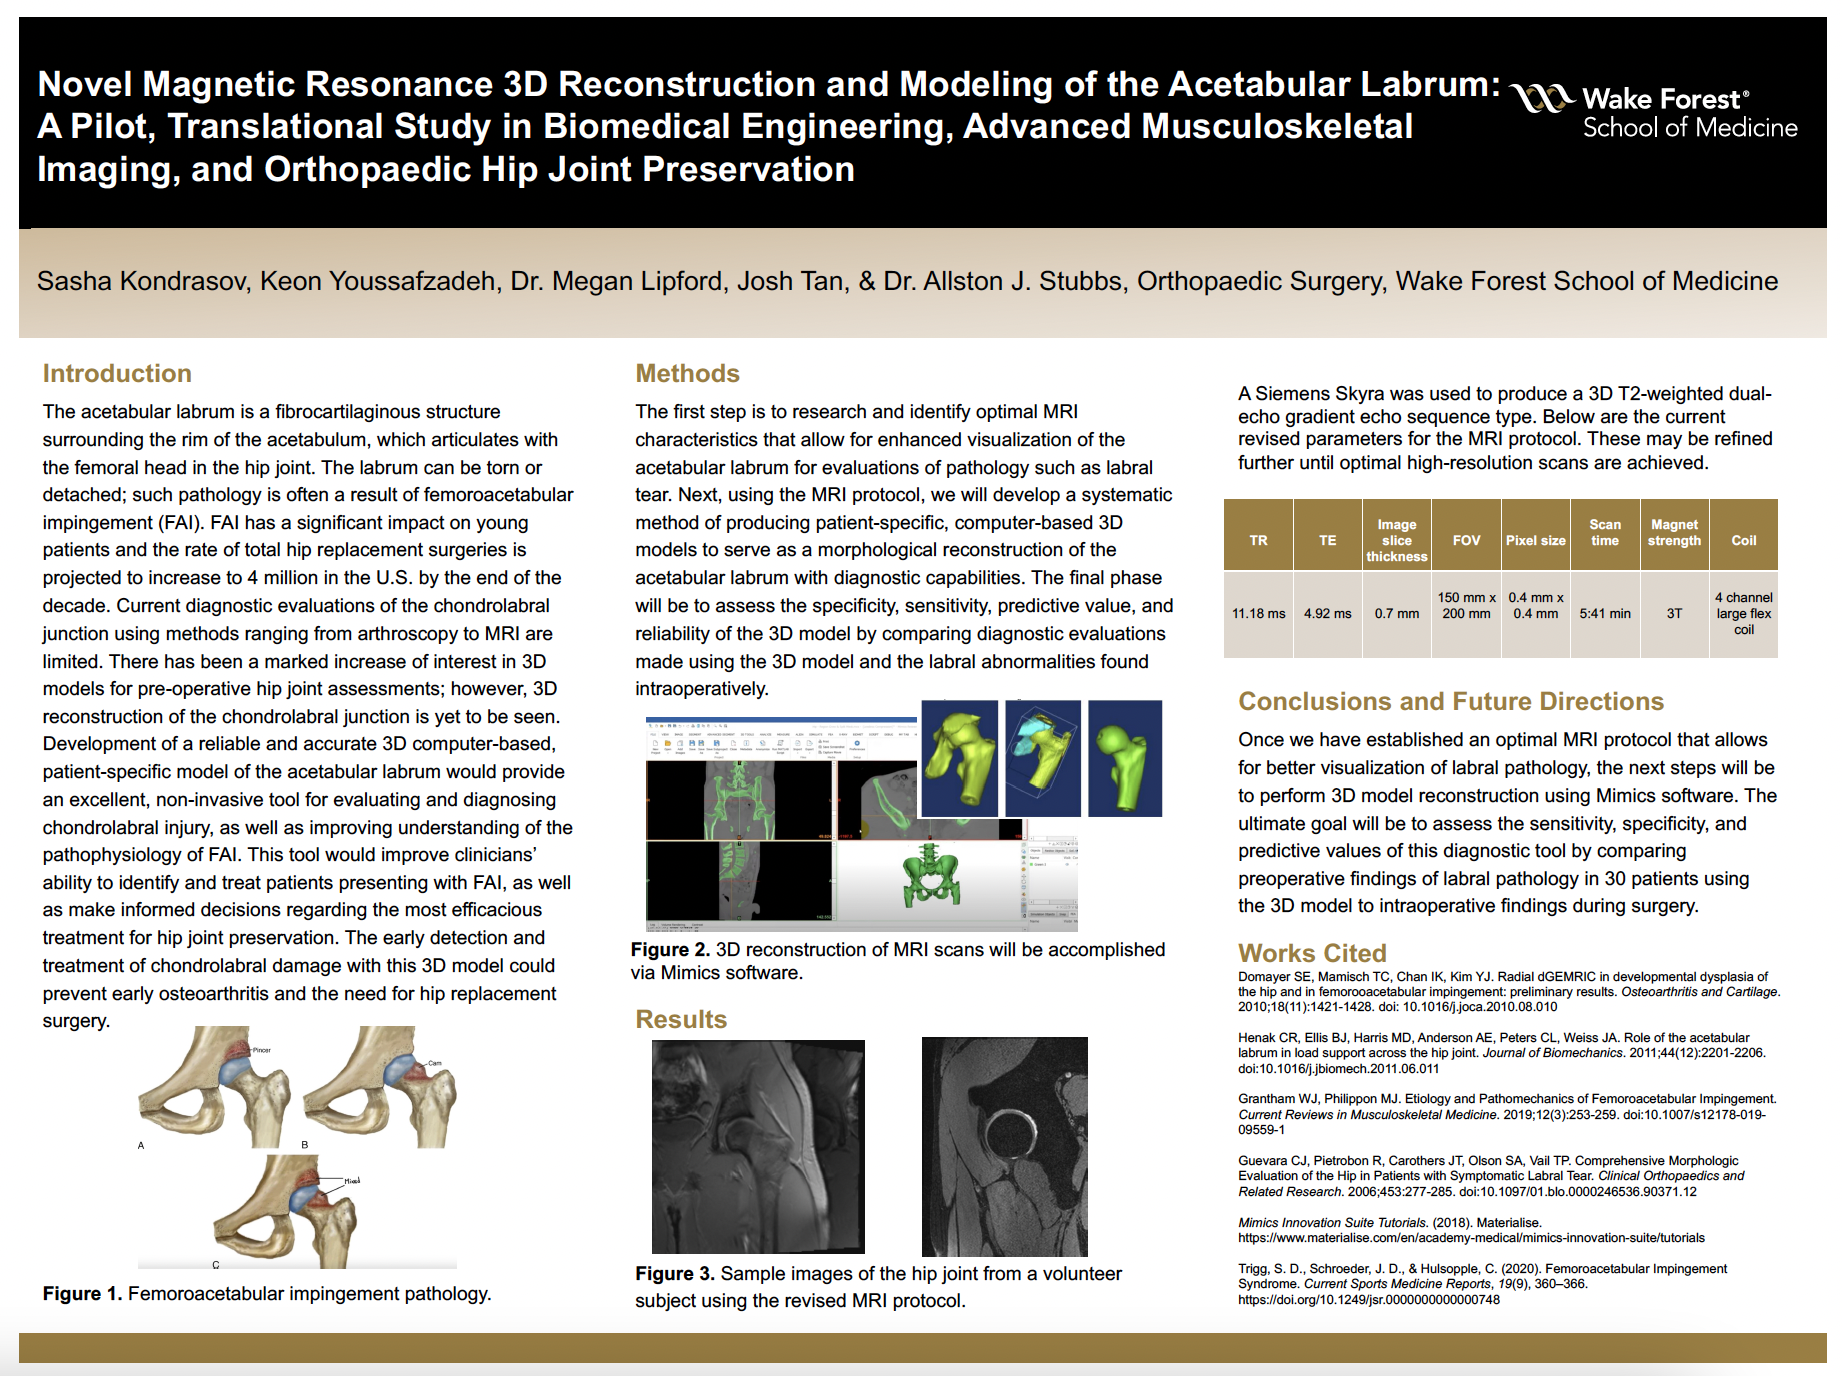 Showcase Image for Novel Magnetic Resonance 3D Reconstruction and Modeling of the Acetabular Labrum: A Pilot, Translational Study in Biomedical Engineering, Advanced Musculoskeletal Imaging, and Orthopaedic Hip Joint Preservation